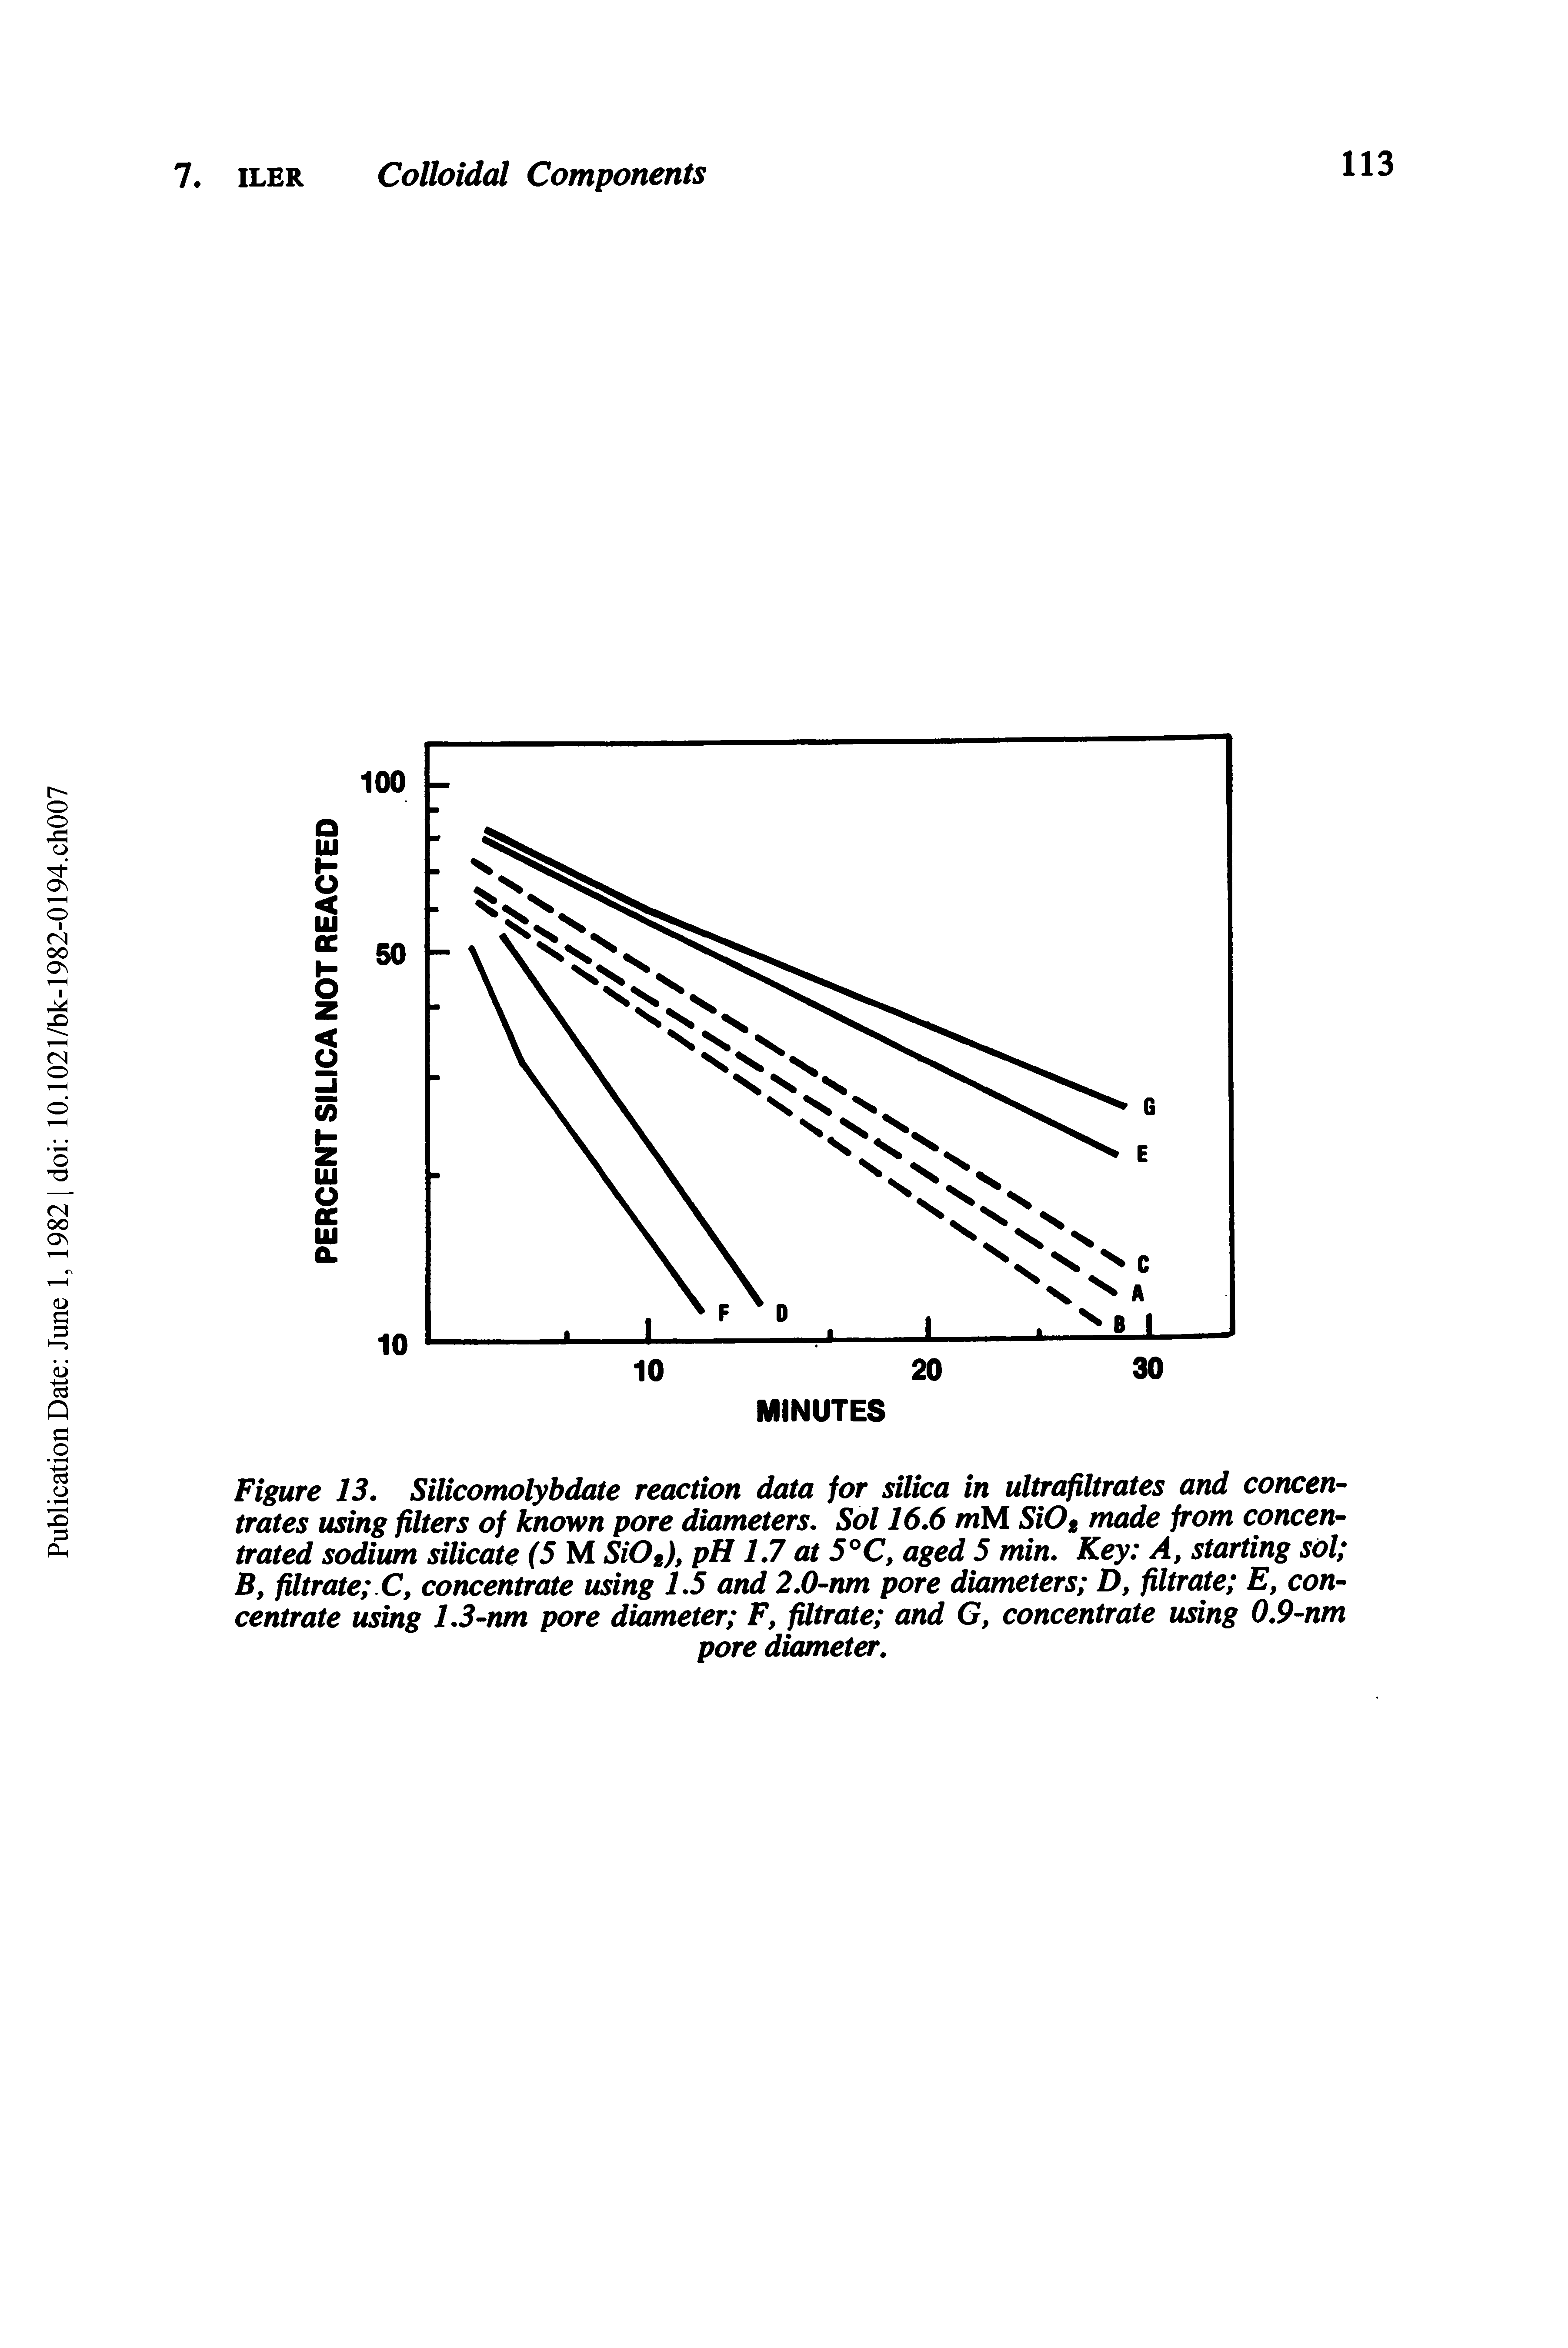 Figure 13, Silicomolybdate reaction data for silica in ultrafiltrates and concentrates using filters of known pore diameters. Sol 16.6 mM SiOt made from concentrated sodium silicate (5 M. SiOg), pH 1.7 at 5 C, aged 5 min. Key A, starting sol B, filtrate C, concentrate using 1.5 and 2.0-nm pore diameters D, filtrate E, concentrate using 1.3-nm pore diameter F, filtrate and G, concentrate using 0.9-nm...